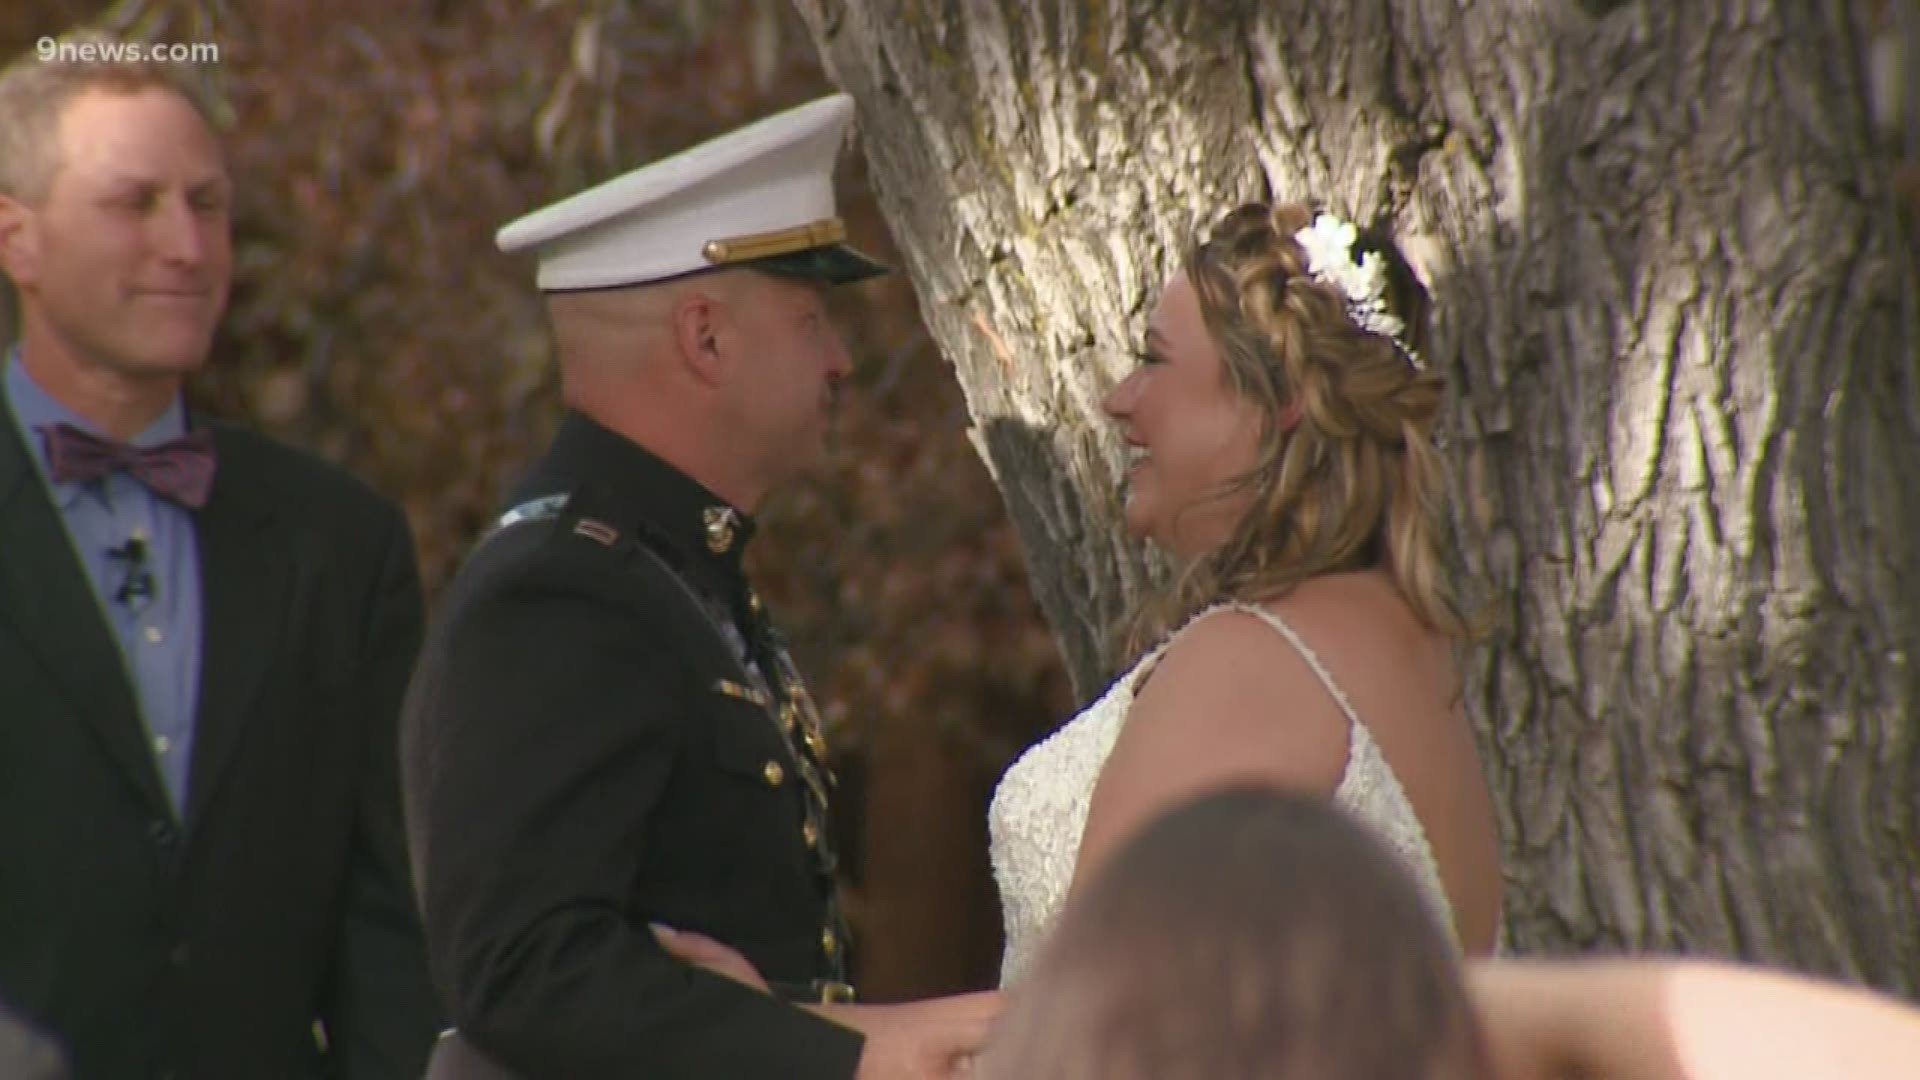 An organization offered to pay for one Colorado woman's wedding ceremony to celebrate beating cancer.